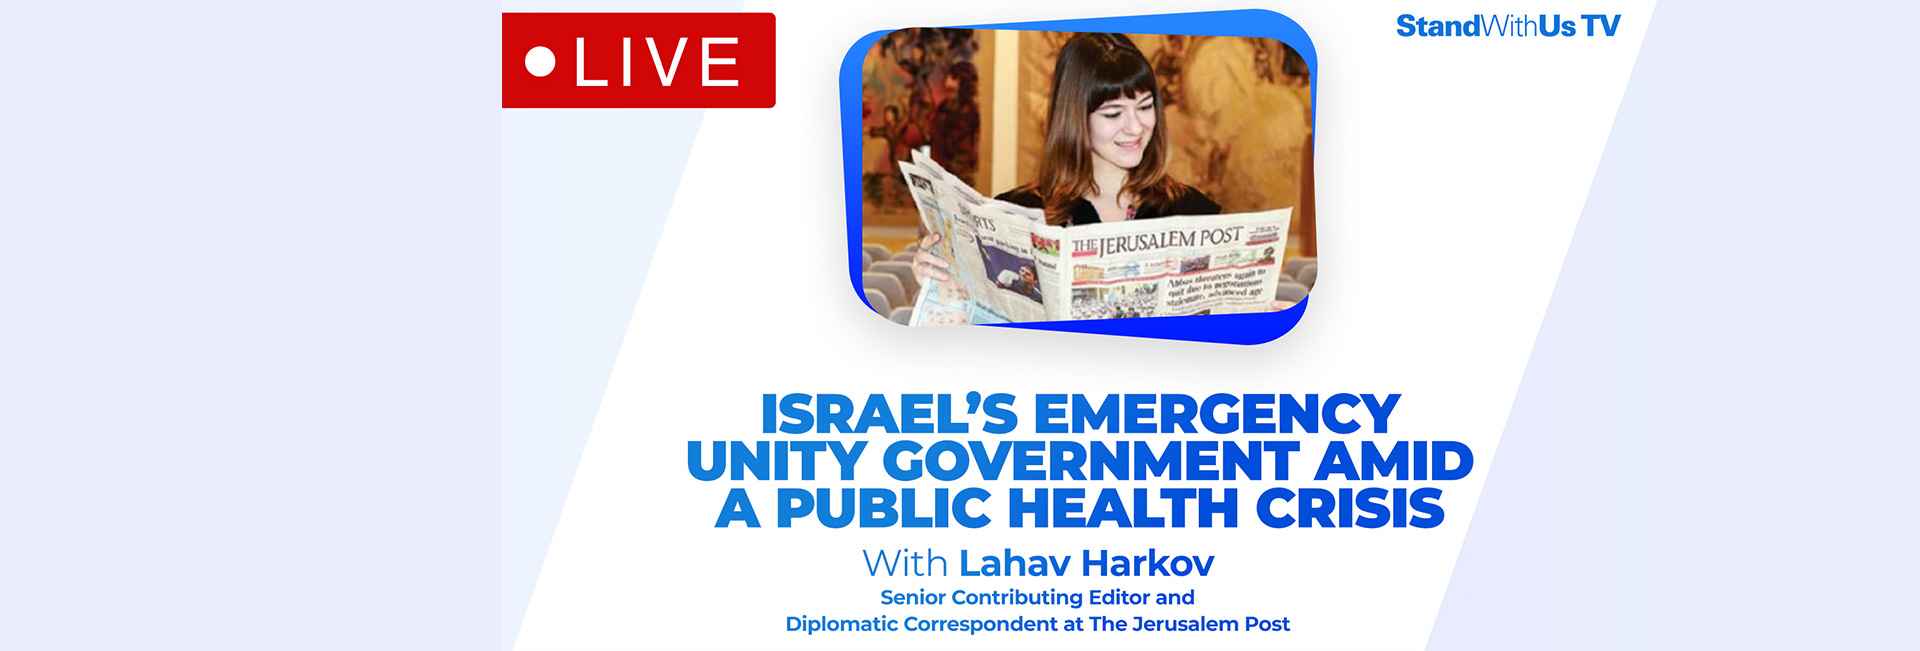 Israel’s Emergency Unity Government Amid a Public Health Crisis | SWUConnect #11